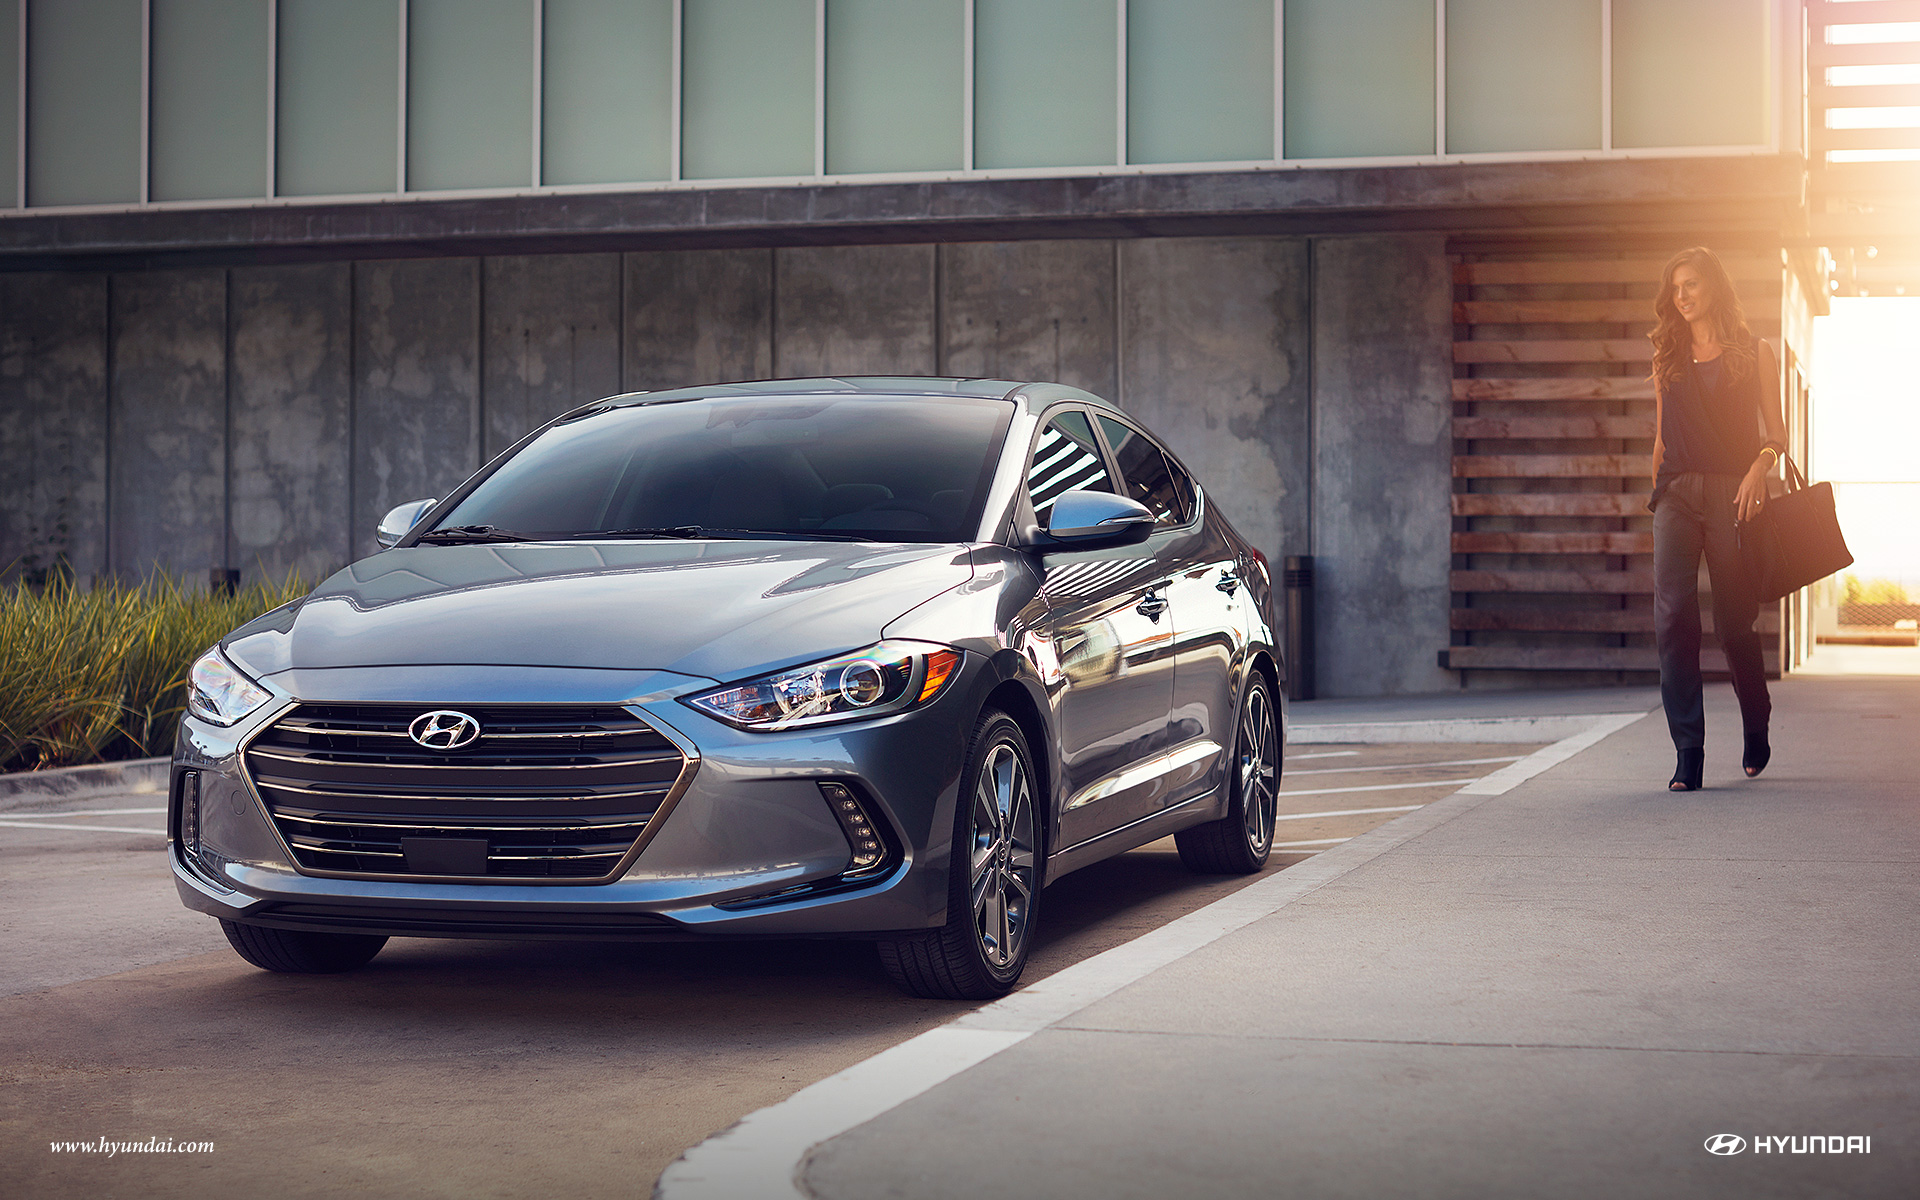 What To Expect From The New Hyundai Elantra